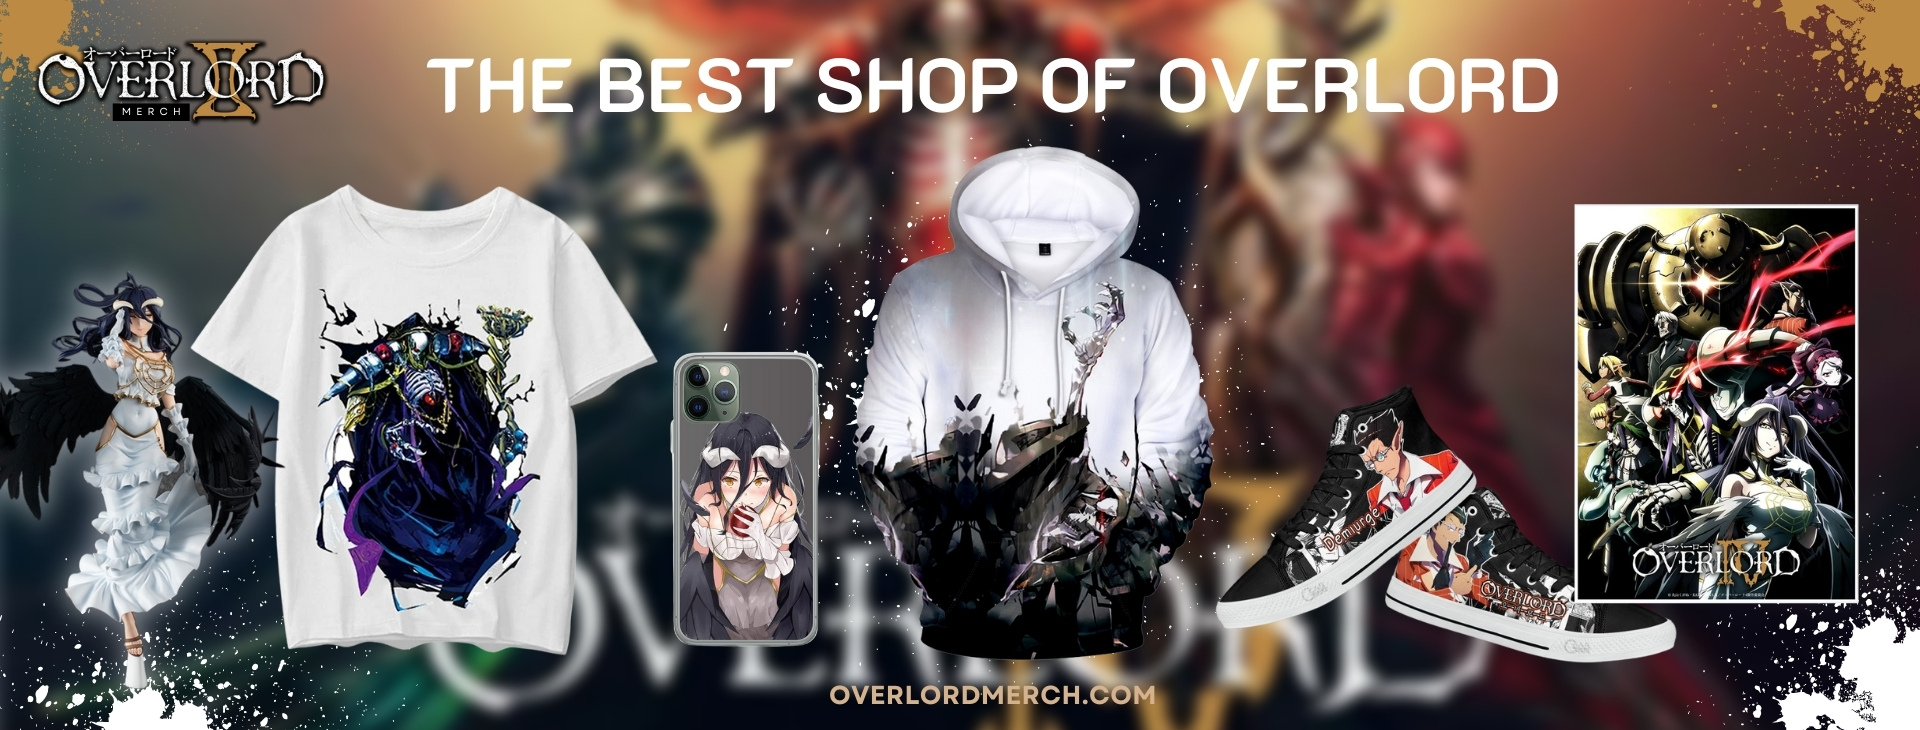 Overlord Shop Banner - Overlord Merch